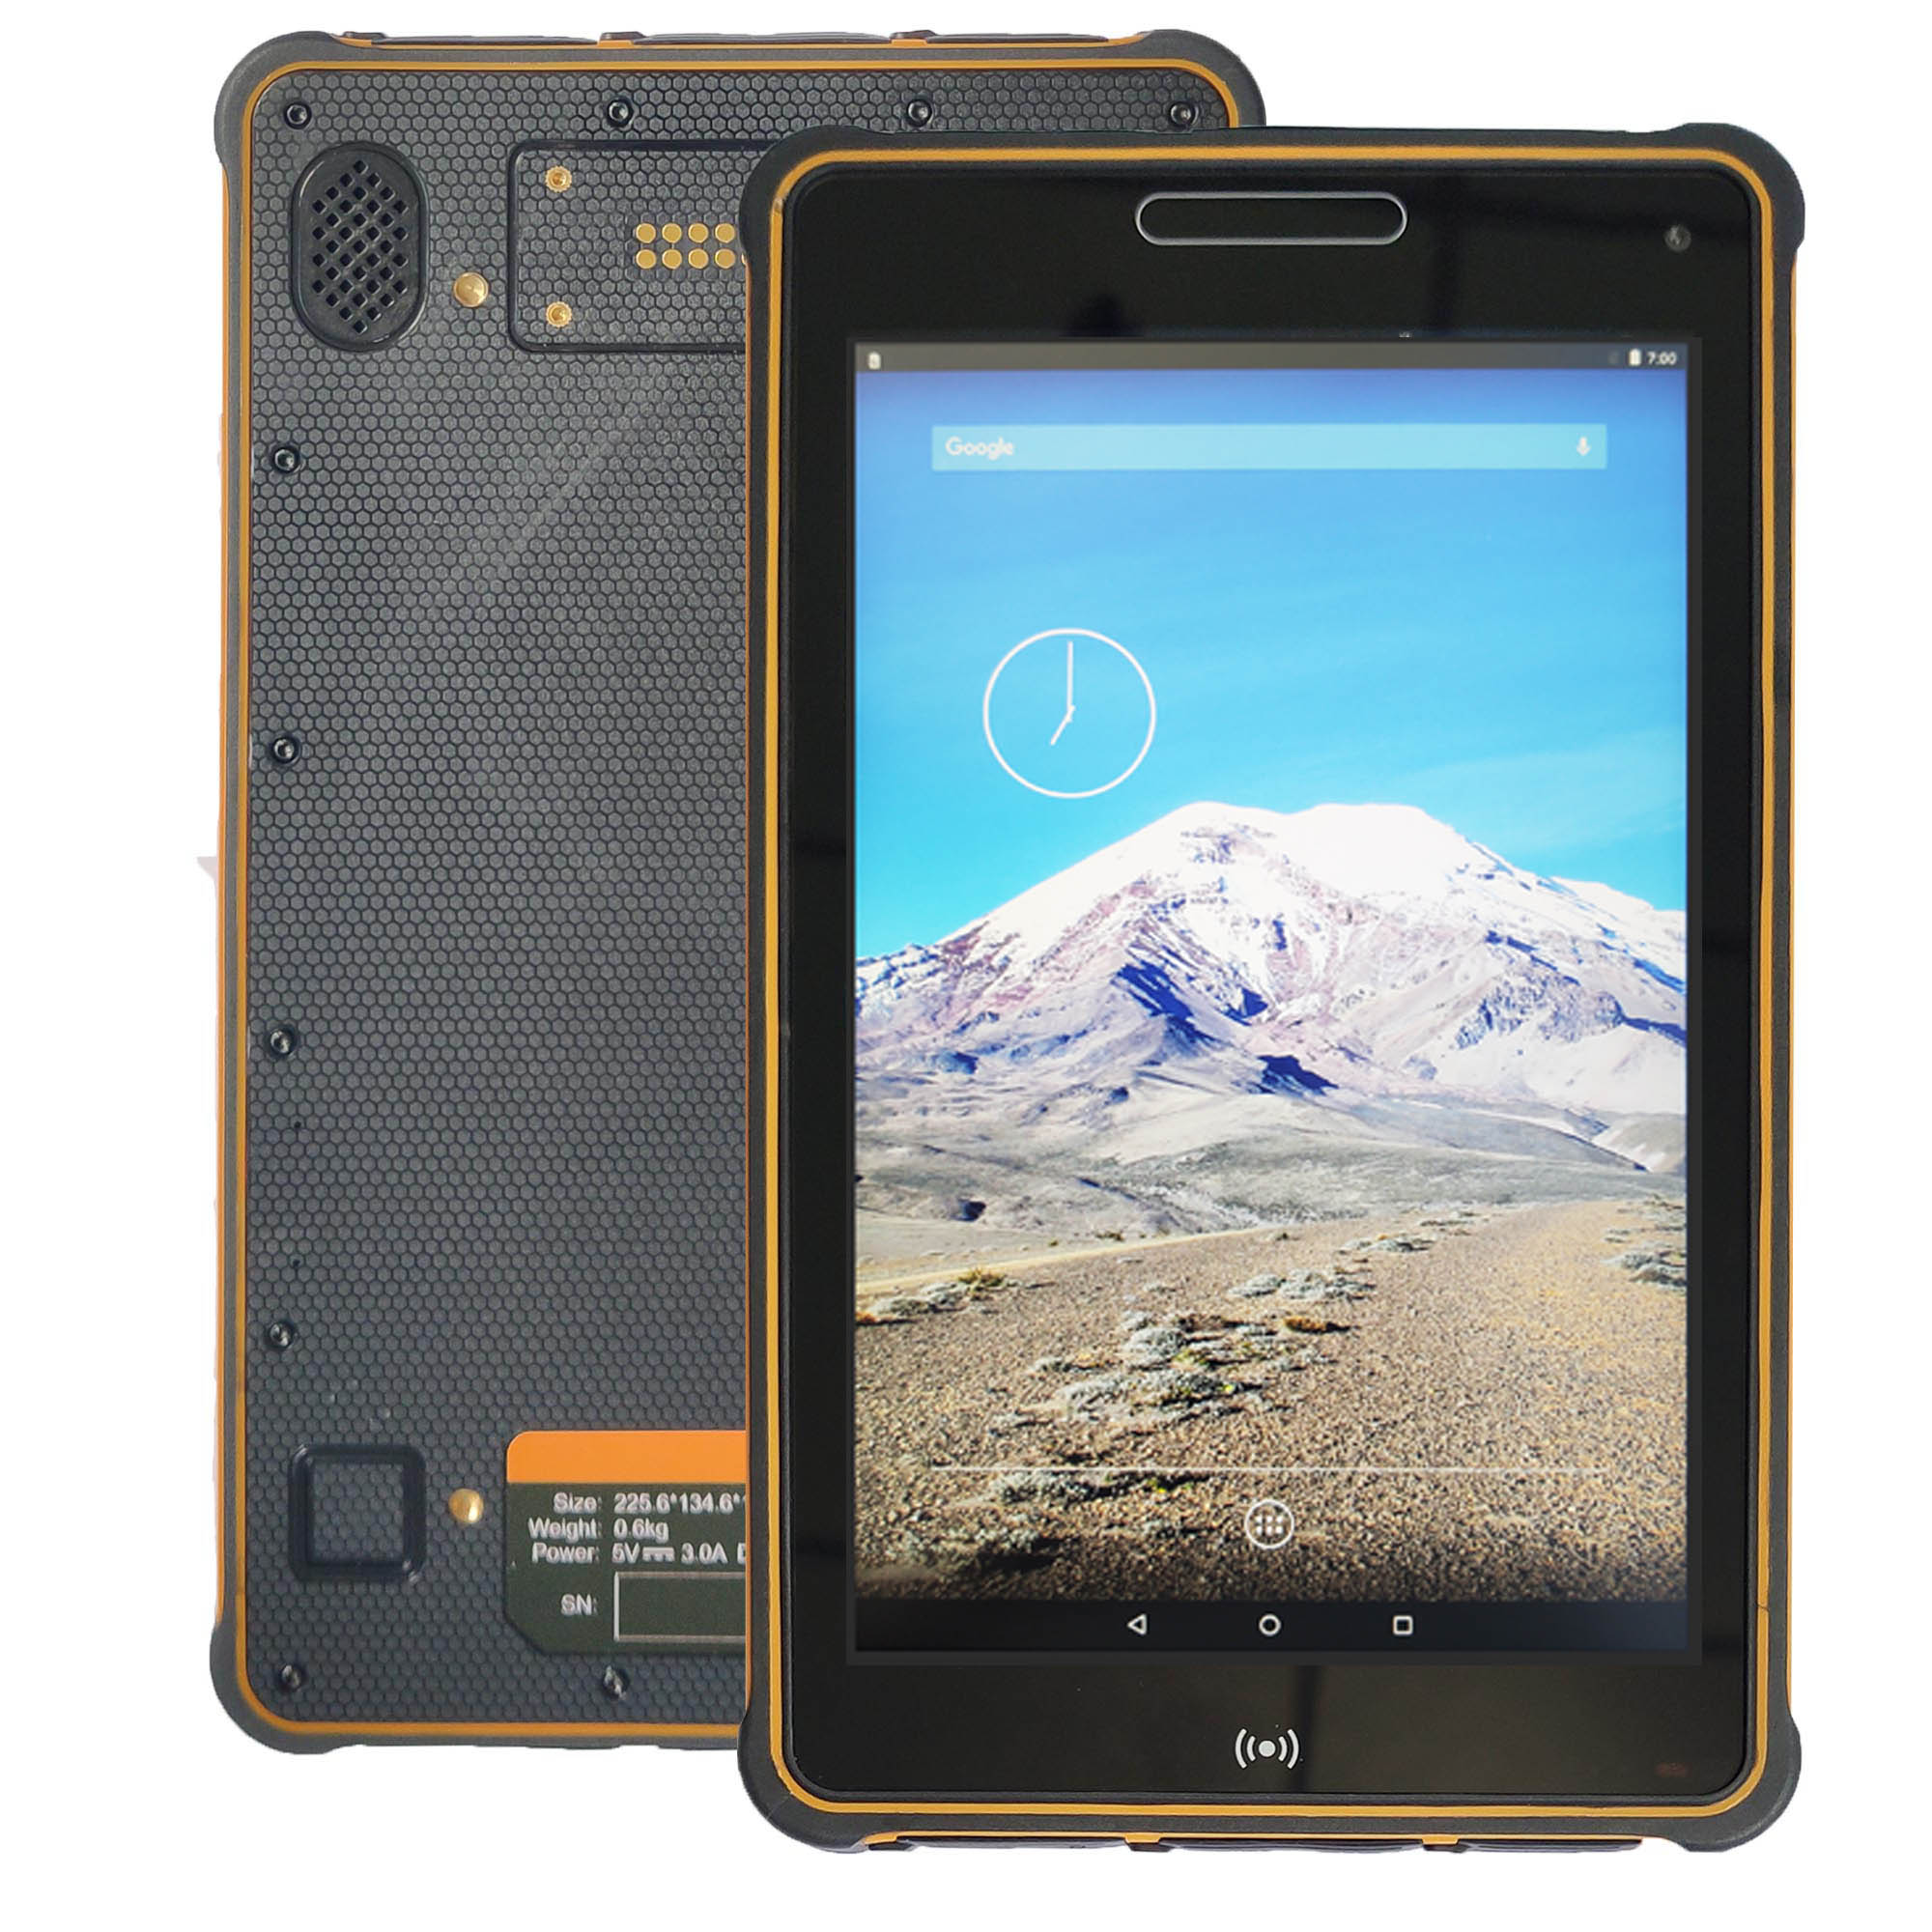 X80 8 Inch Android or Windows Rugged Tablet PC with Barcode